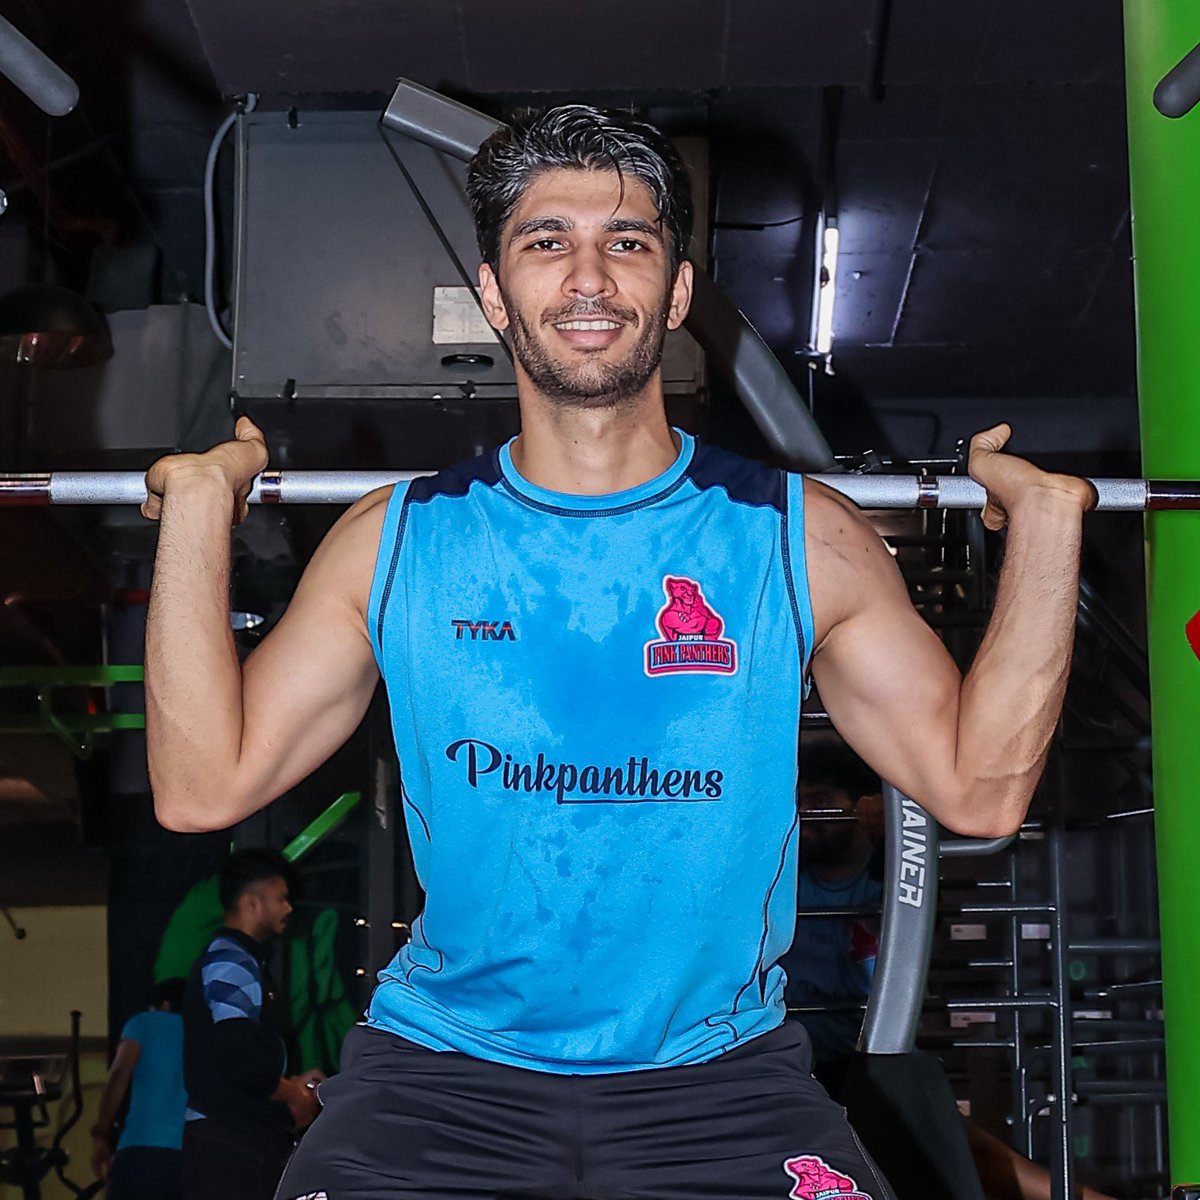 Only Amir bhai can keep smiling even during a 𝙬𝙤𝙧𝙠𝙤𝙪𝙩 😅🏋

#JPP #Kabaddi #RoarForPanthers